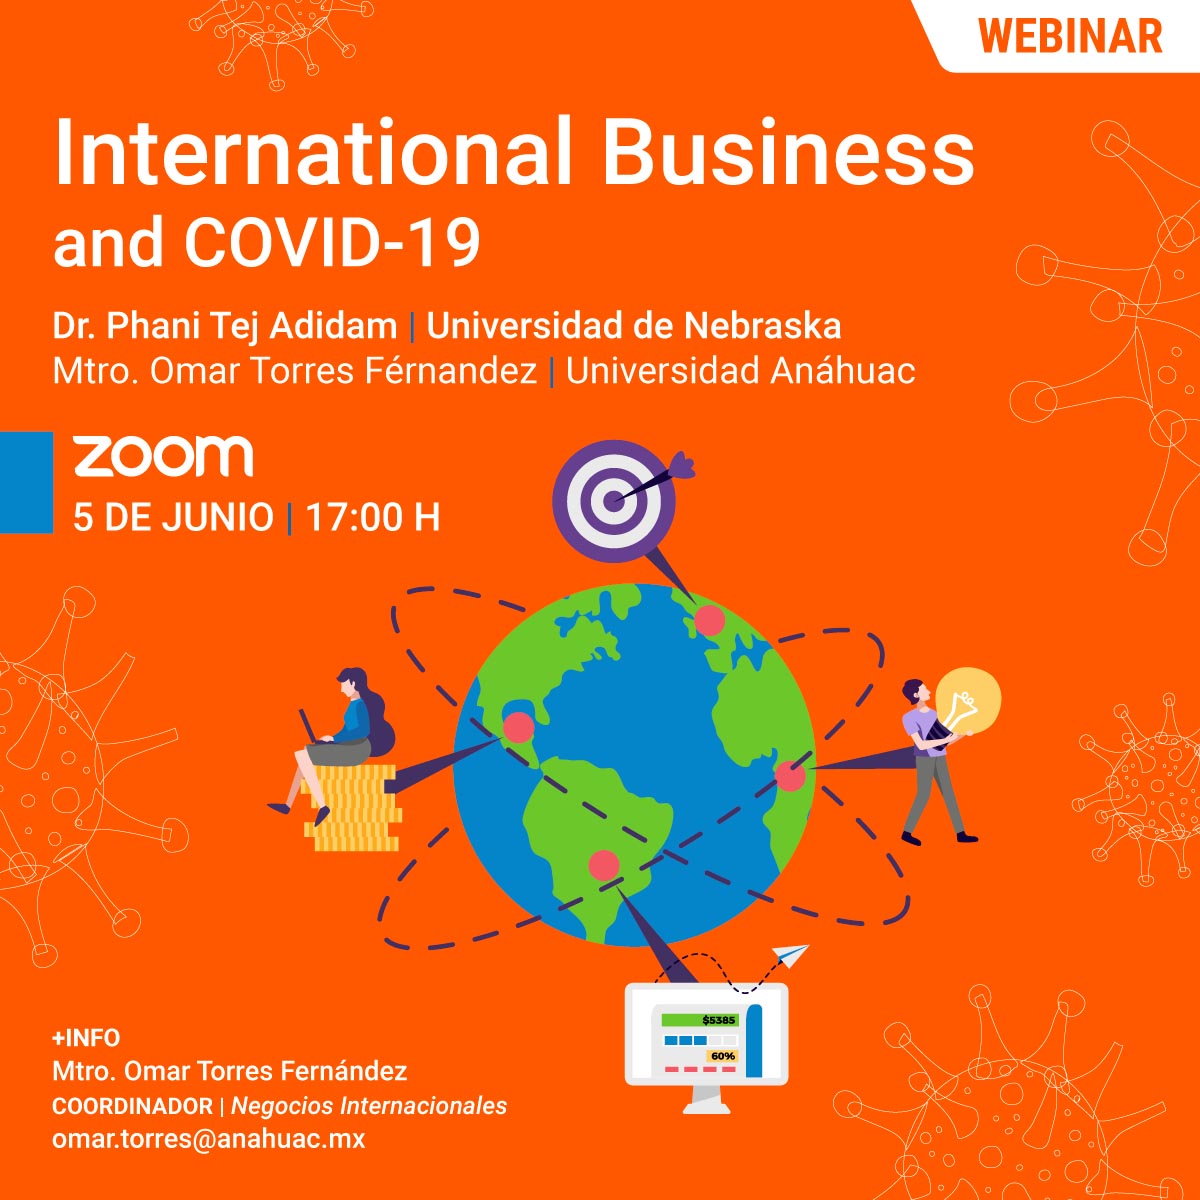 International Business and COVID-19